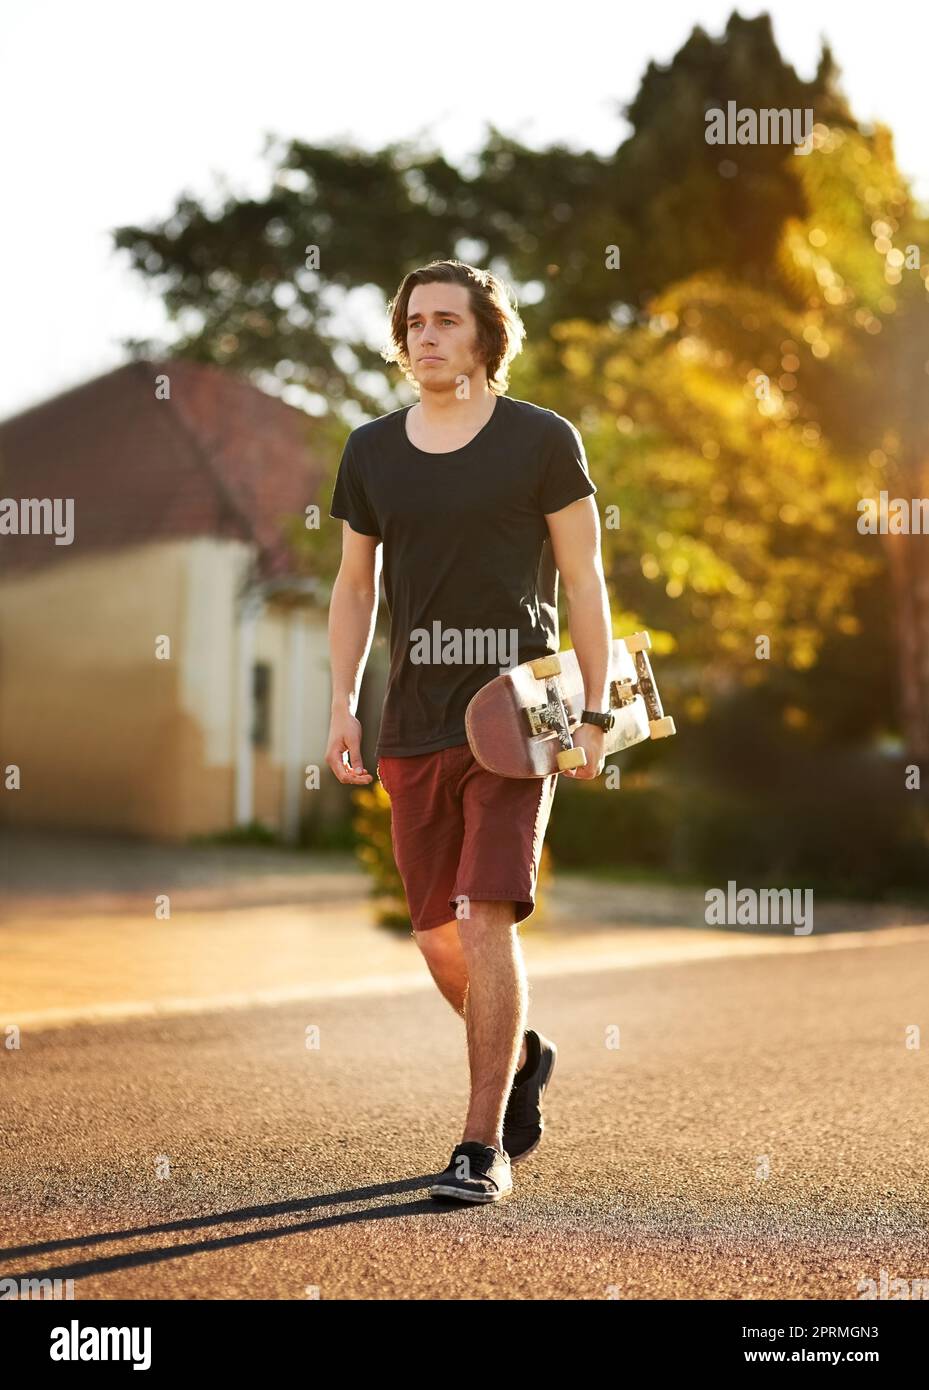 Heading off to the skatepark. a young man walking with is skateboard in hand outside. Stock Photo